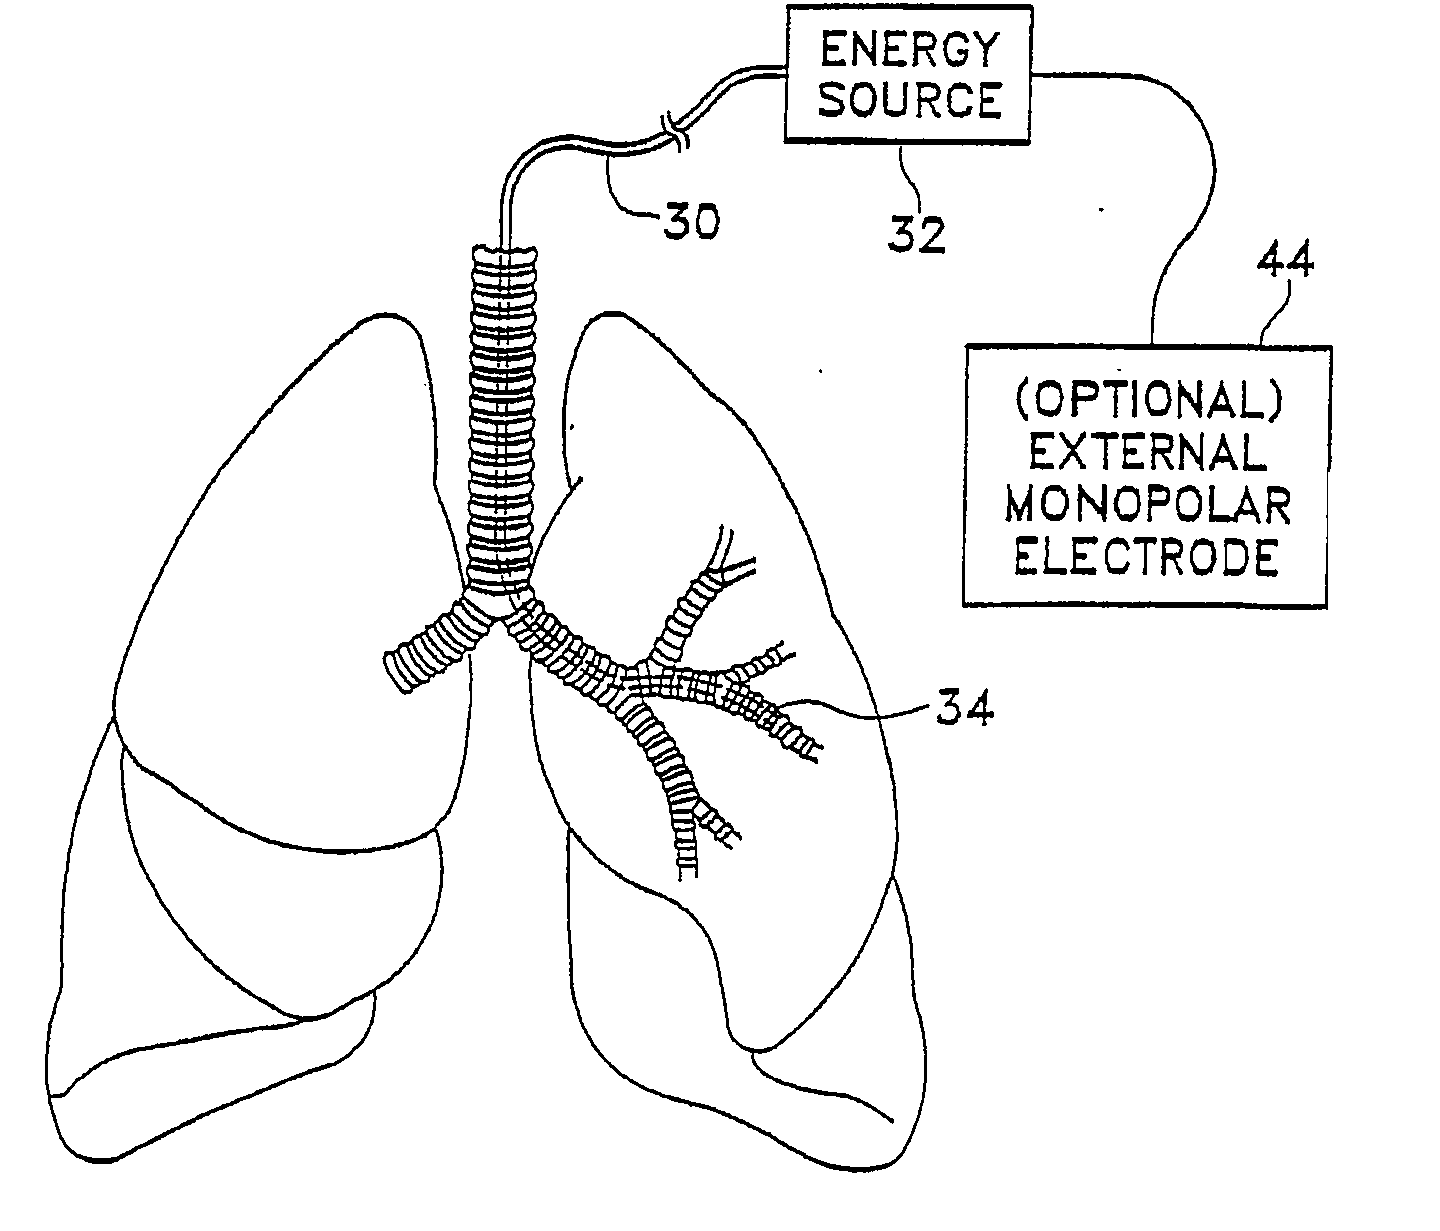 Modification of airways by application of energy